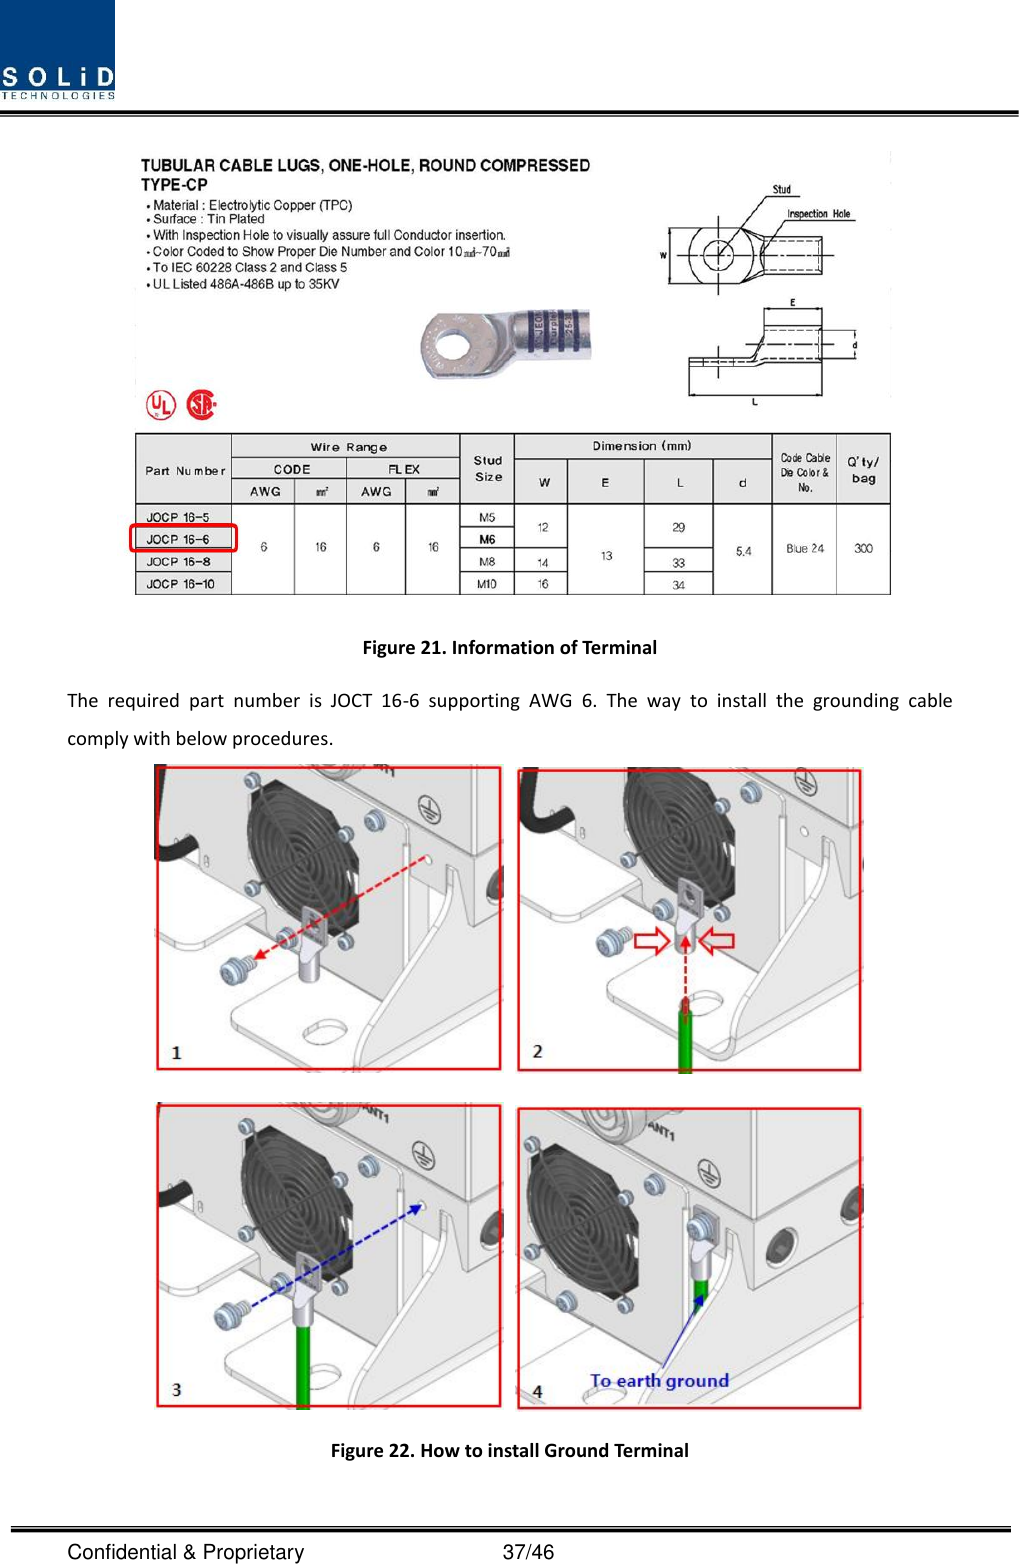  Confidential &amp; Proprietary                                      37/46  Figure 21. Information of Terminal The  required  part  number  is  JOCT  16-6  supporting  AWG  6.  The  way  to  install  the  grounding  cable comply with below procedures.     Figure 22. How to install Ground Terminal  